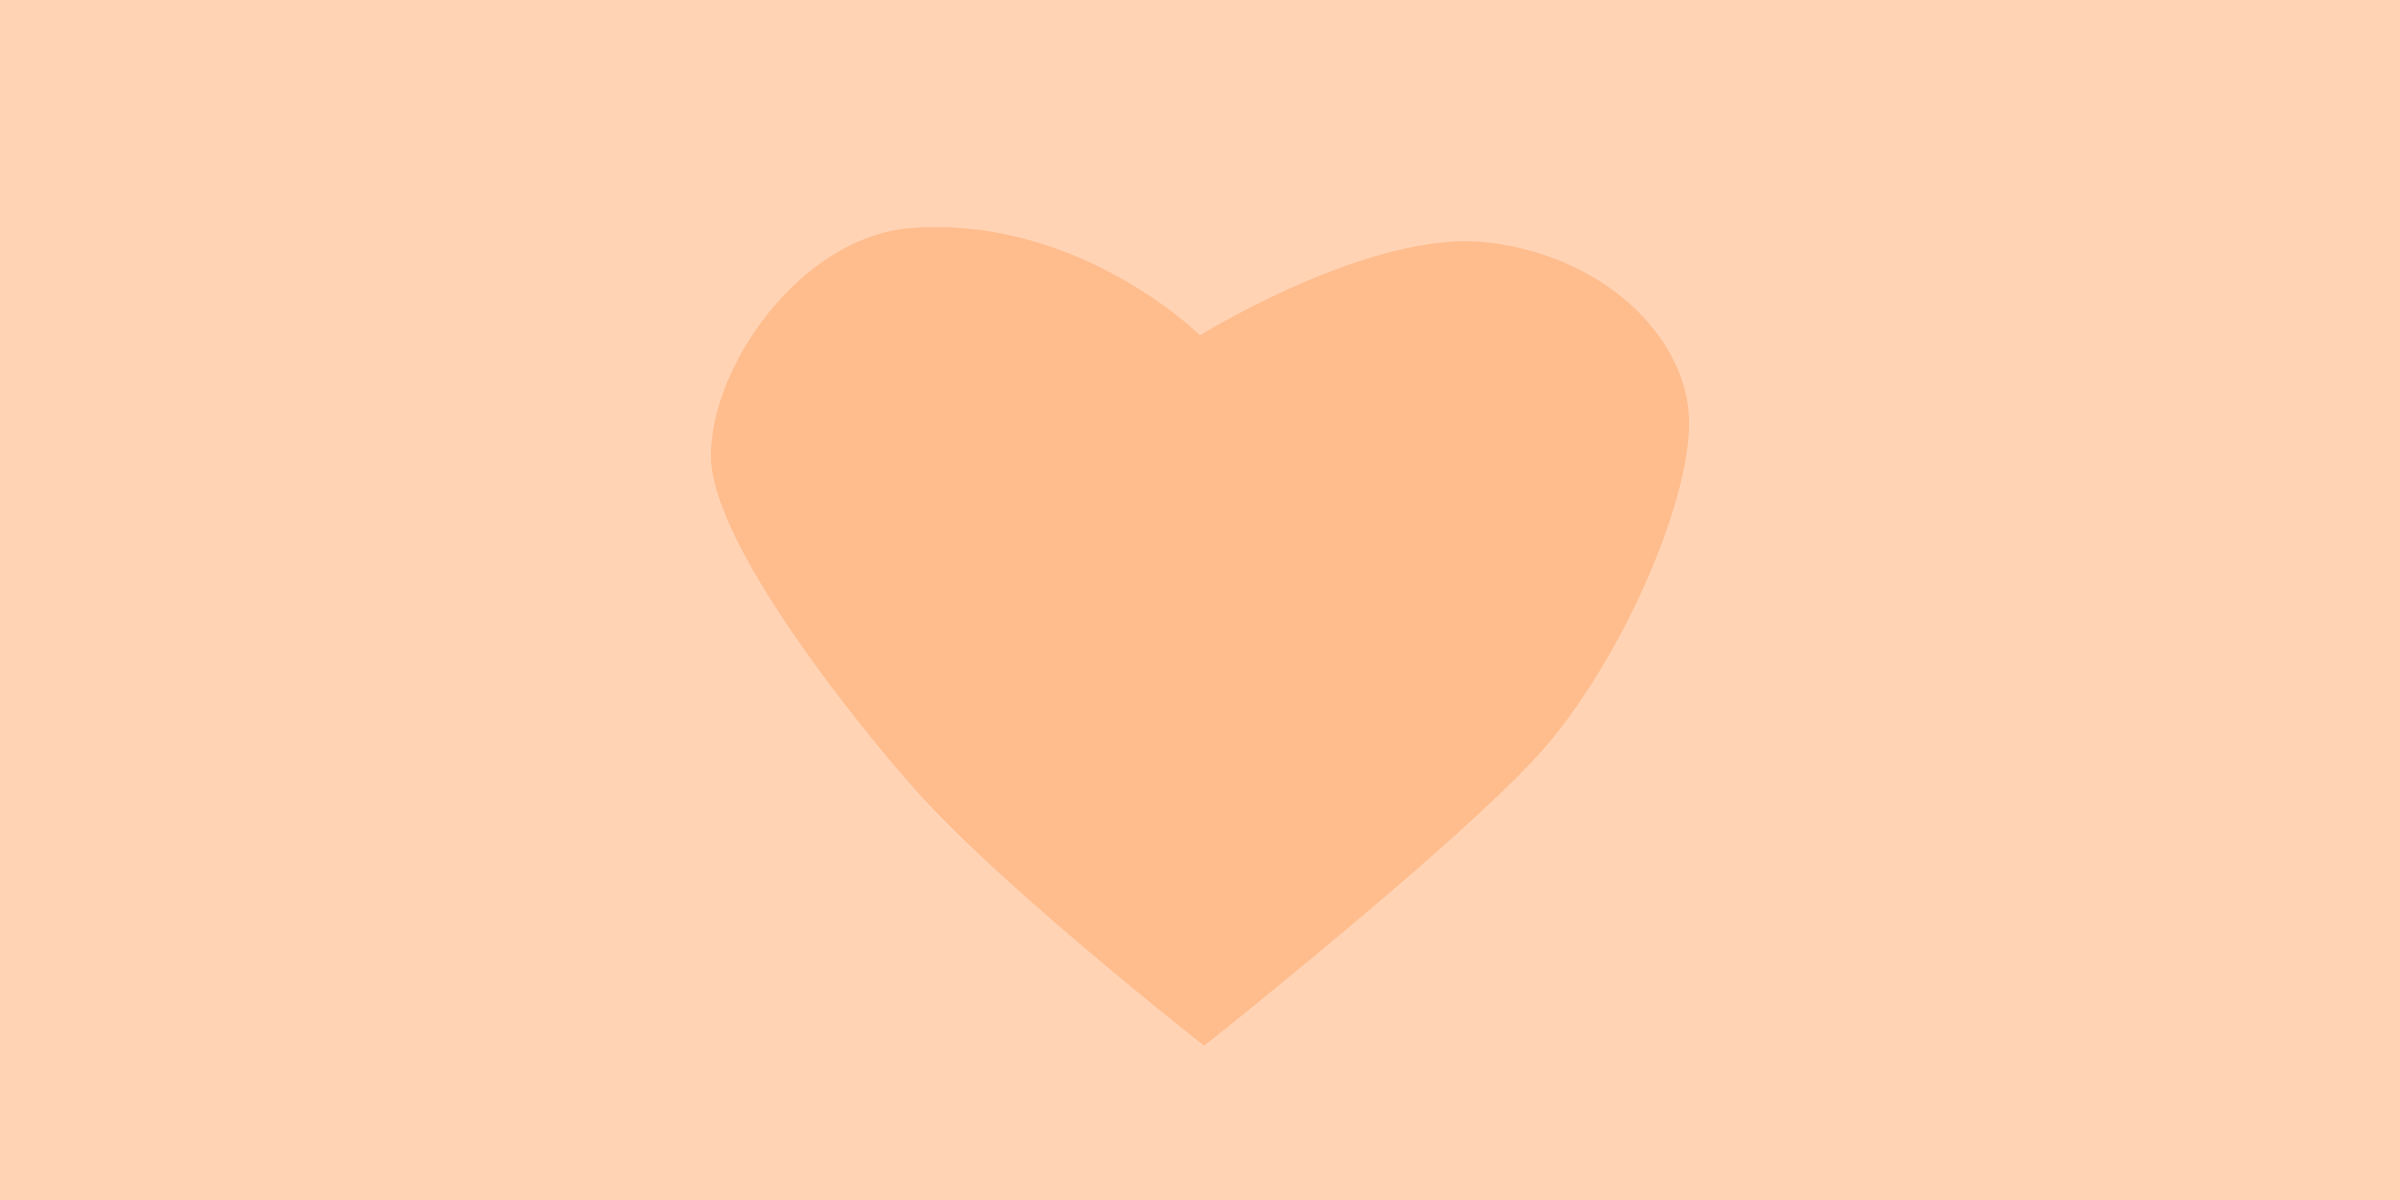 Illustration of a heart in tons of orange